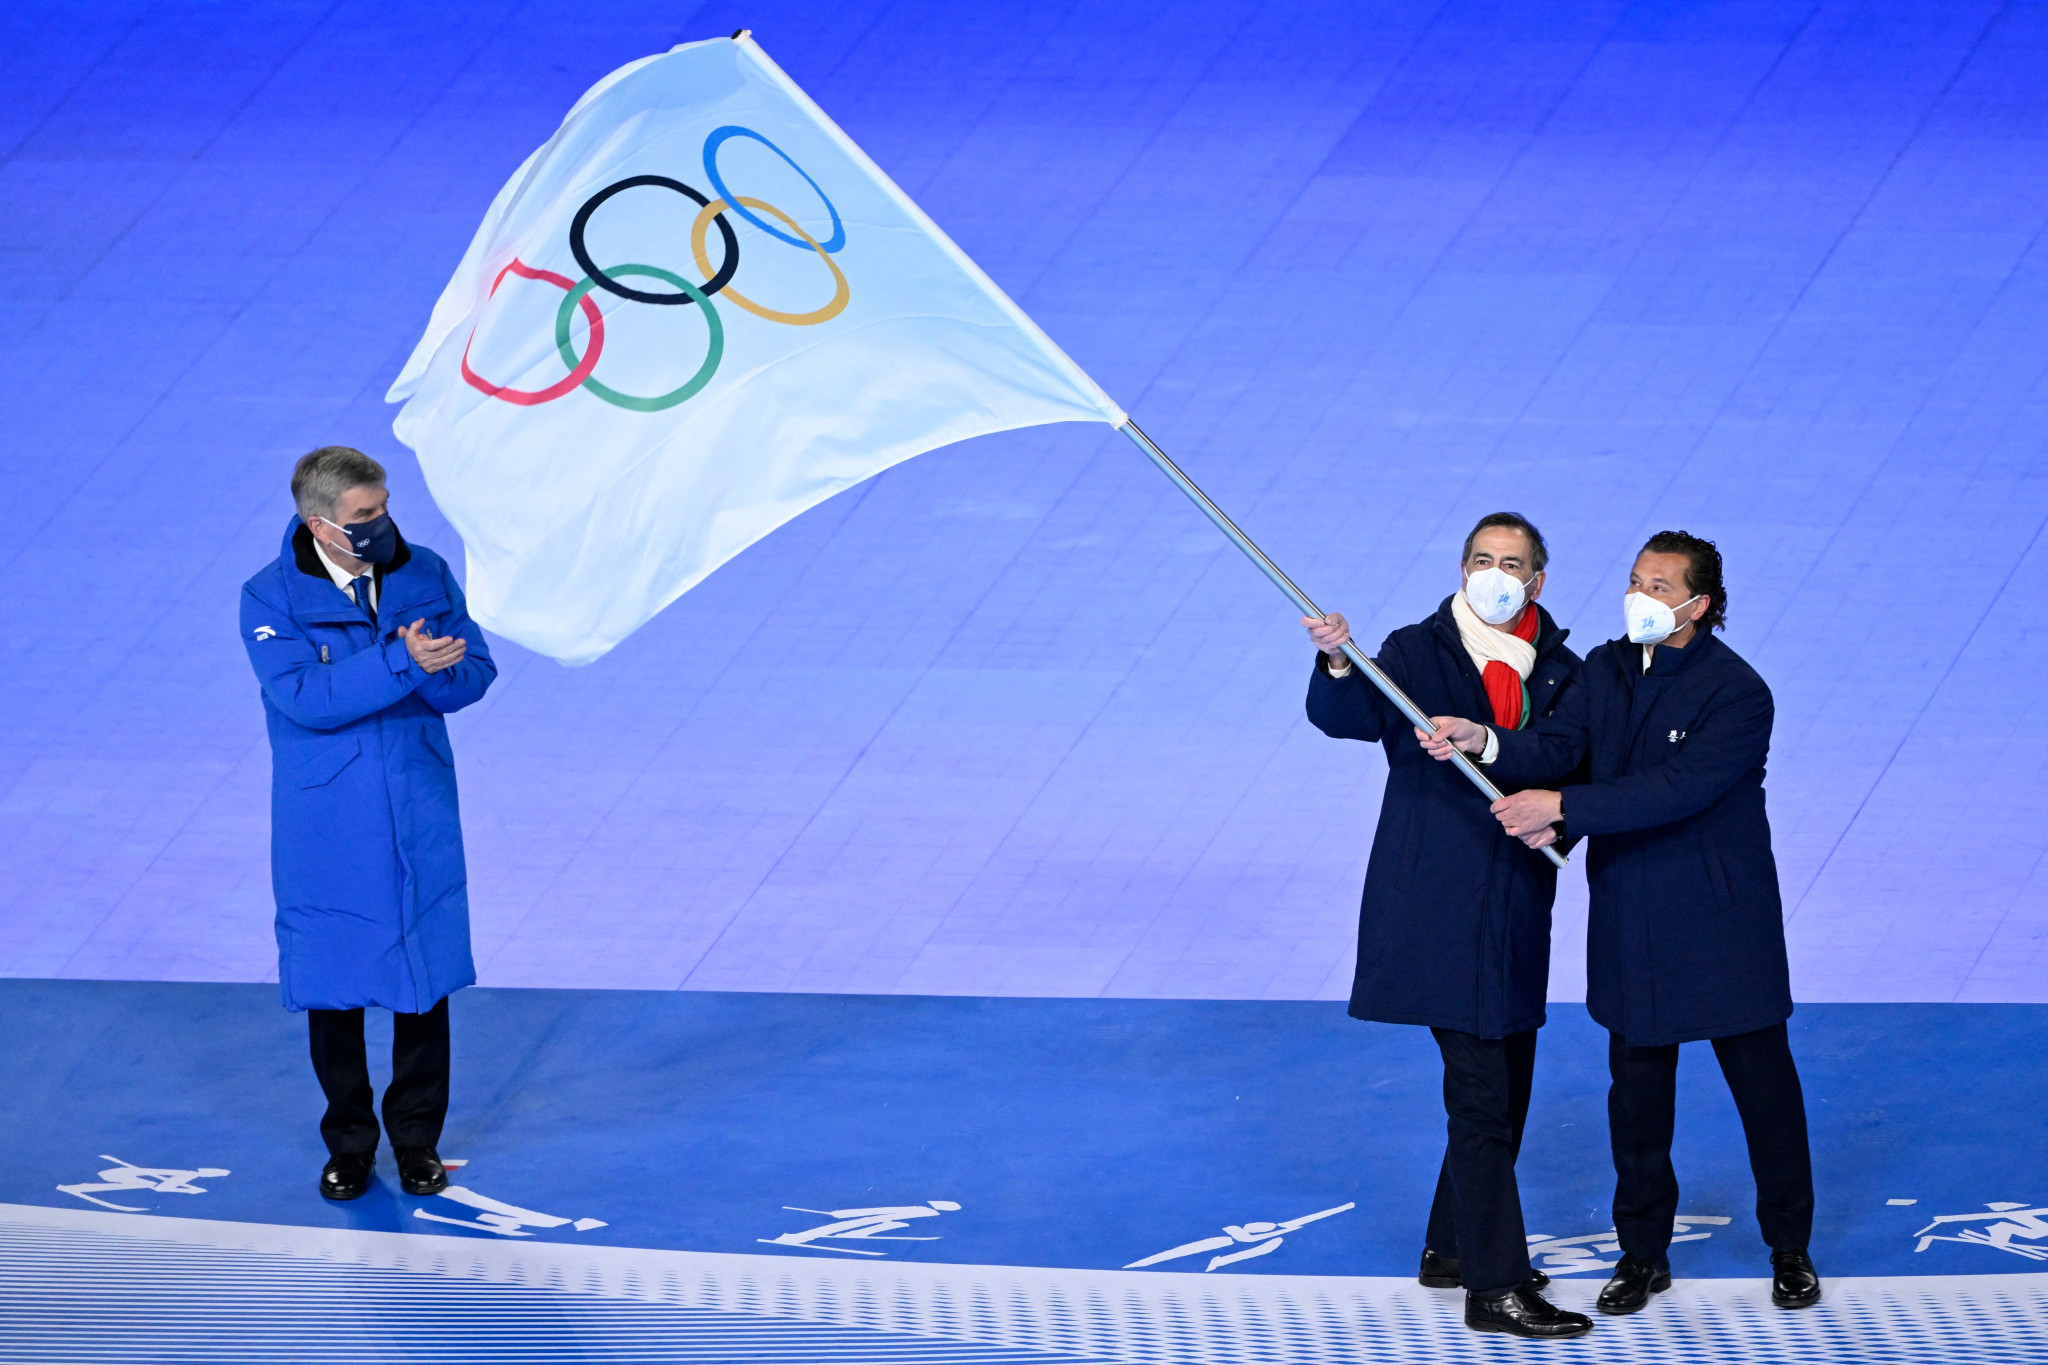 Mayors Giuseppe Sala and Gianpietro Ghedina were given the Olympic Flag ©Getty Images